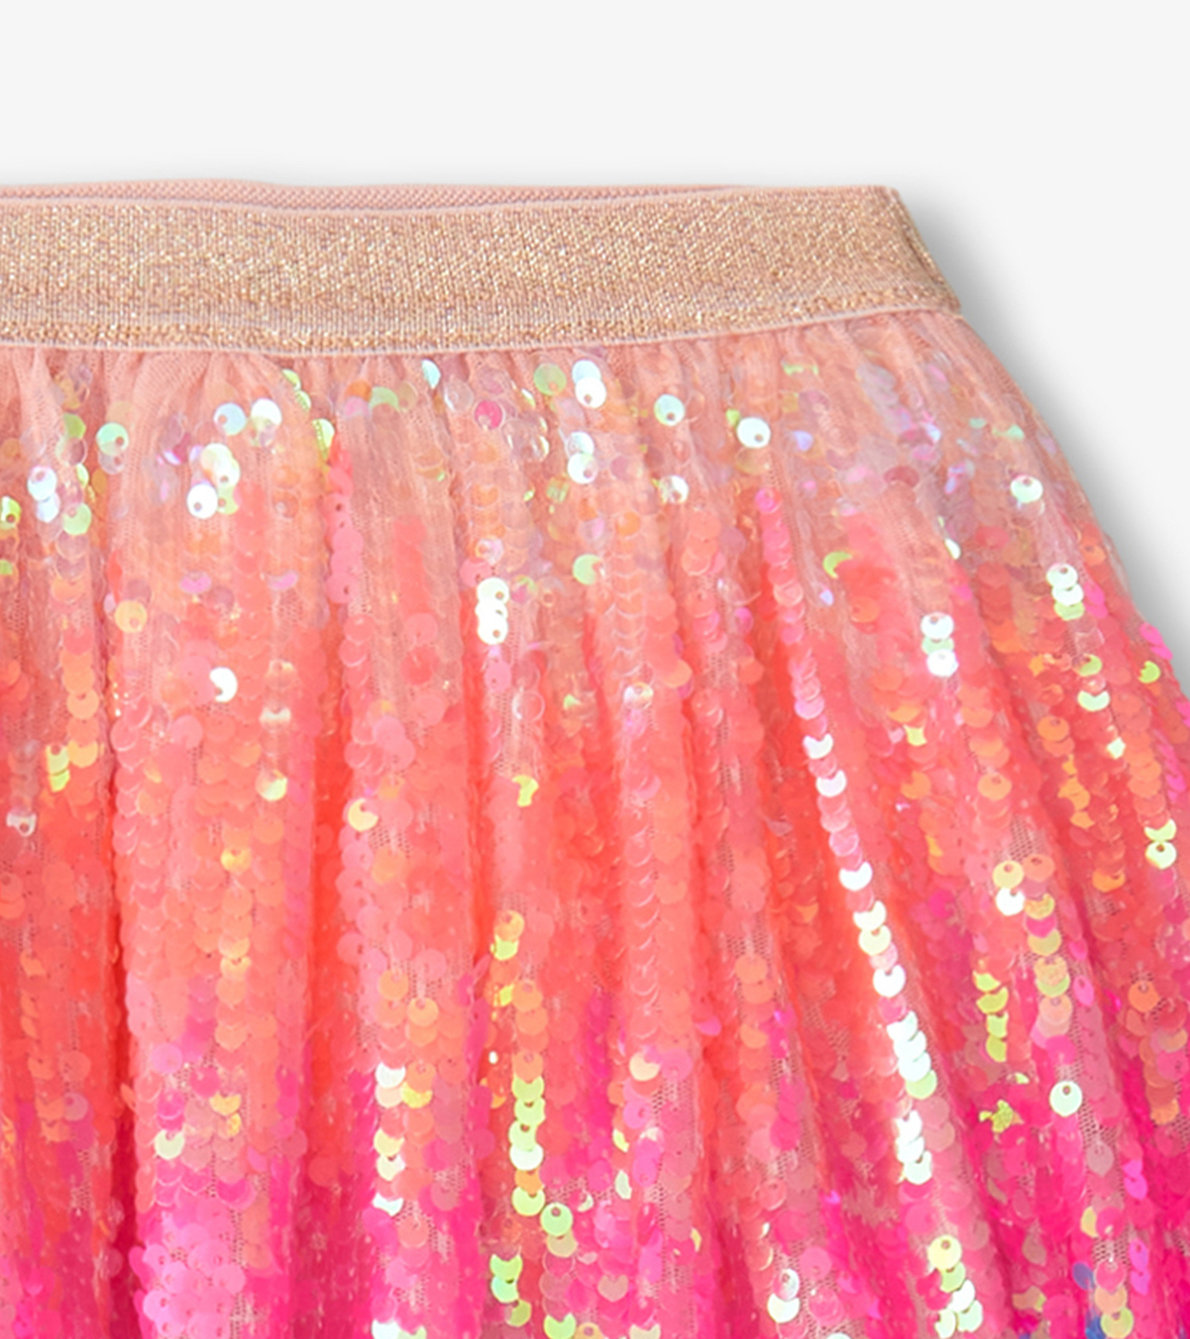 View larger image of Girls Happy Sparkly Sequin Tulle Skirt